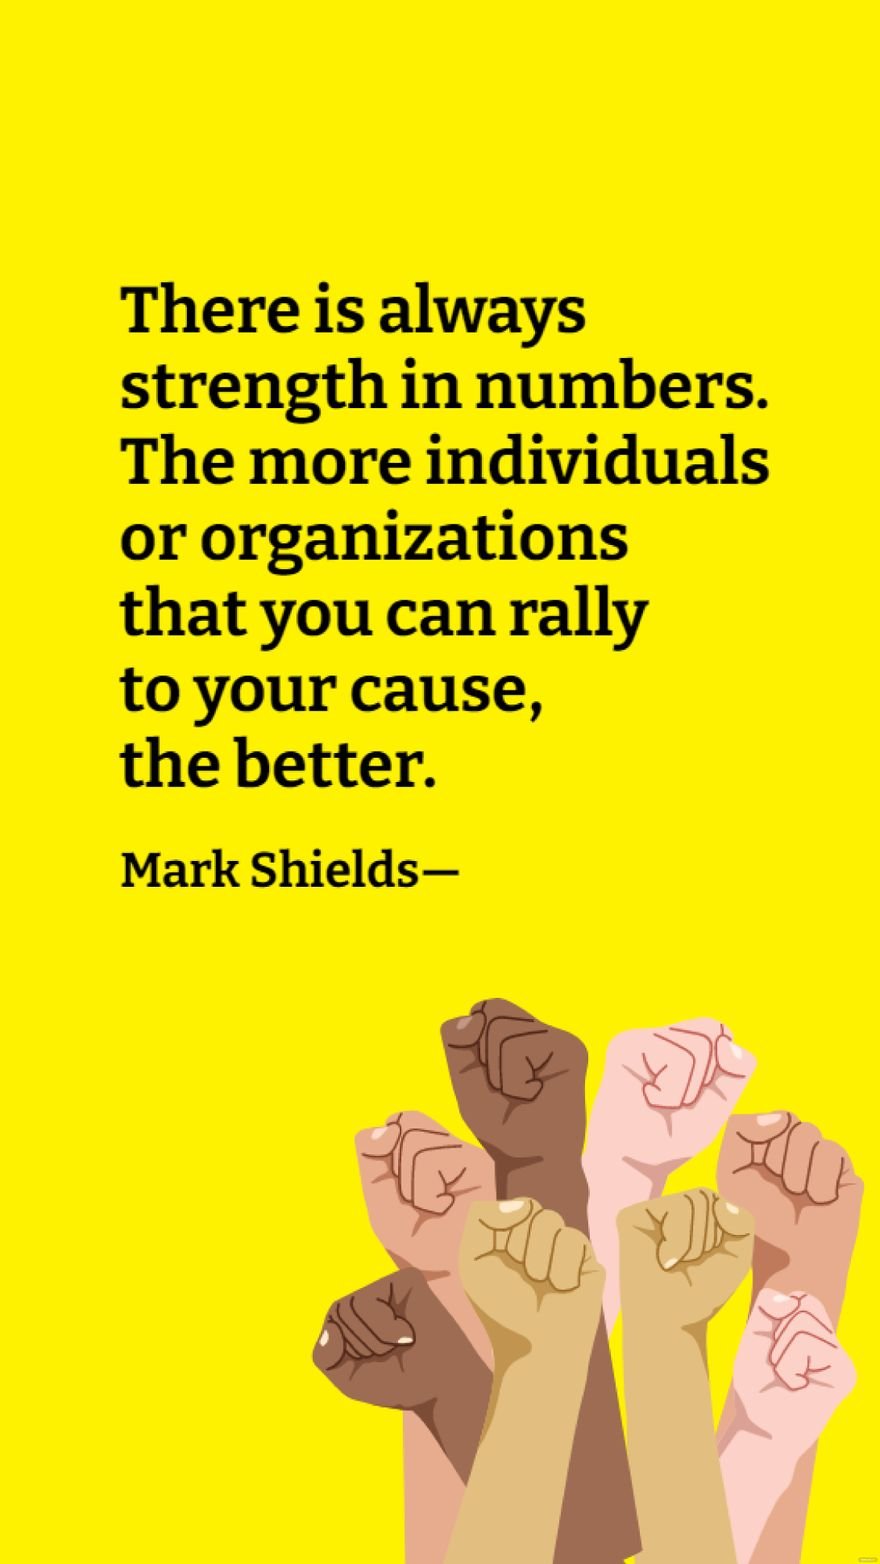 Mark Shields - There is always strength in numbers. The more individuals or organizations that you can rally to your cause, the better.